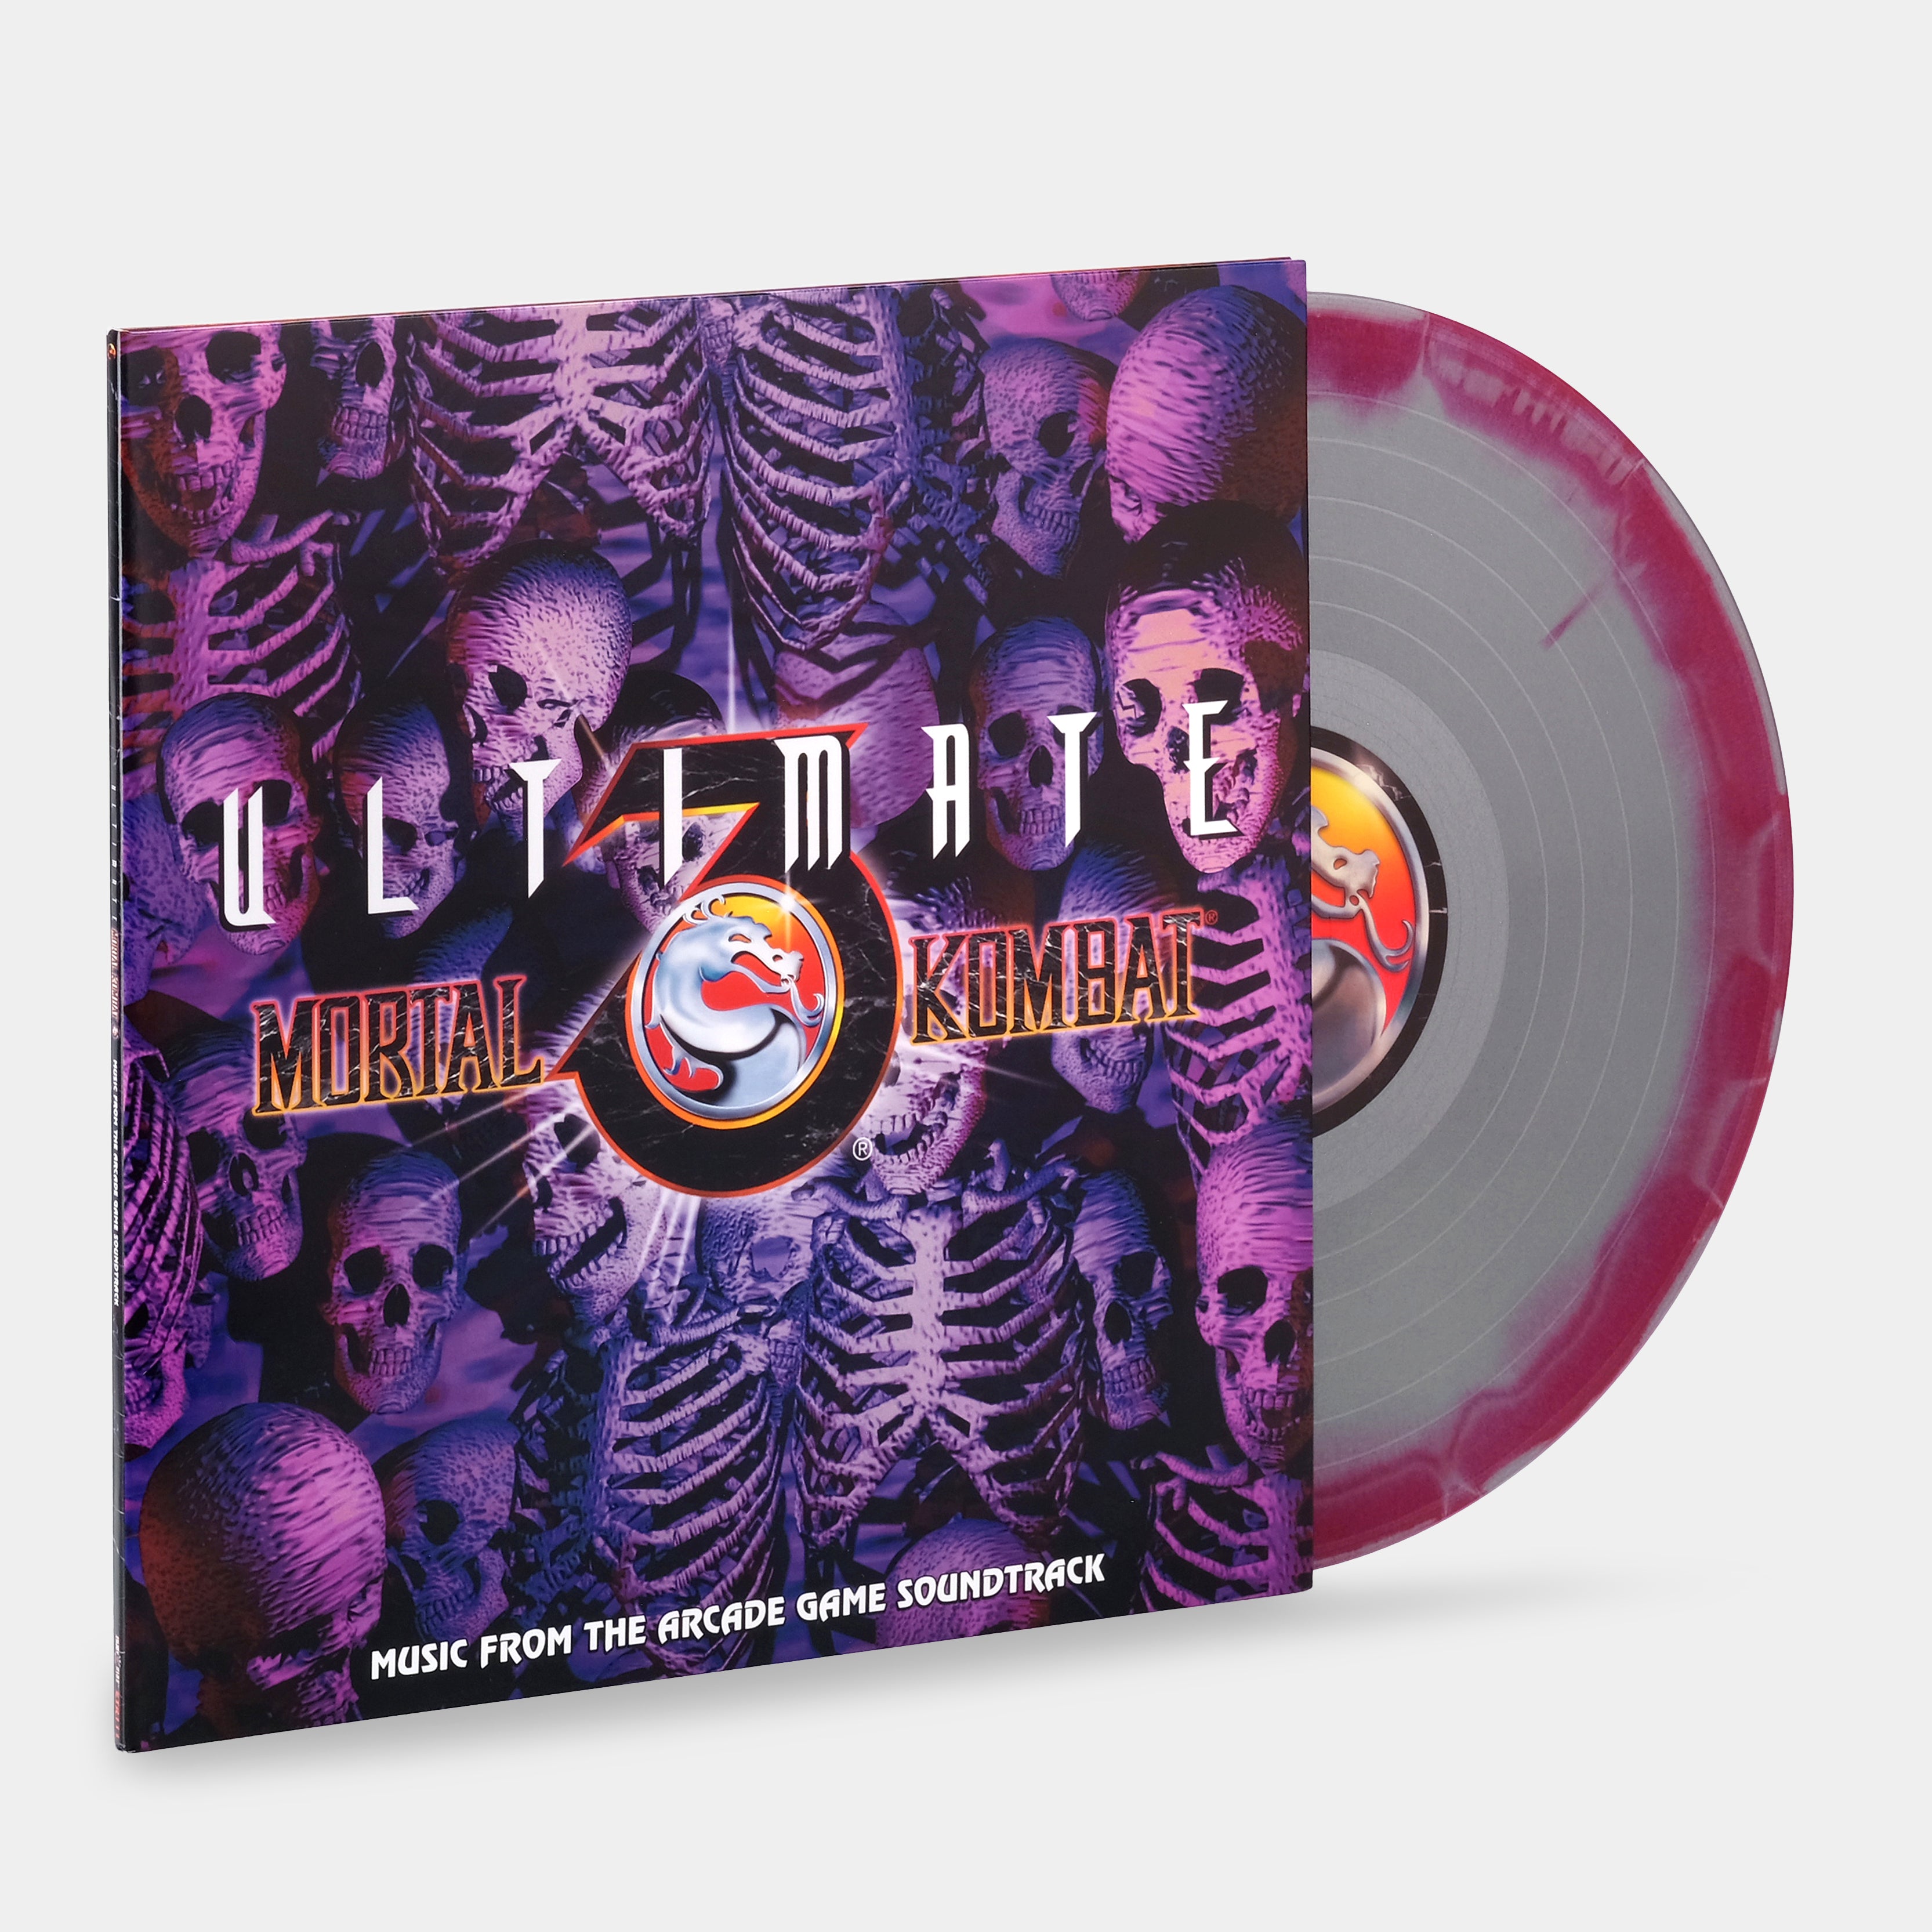 Dan Forden - Ultimate Mortal Kombat 3: Music From The Arcade Game Soundtrack LP Silver & Red Swirl Vinyl Record